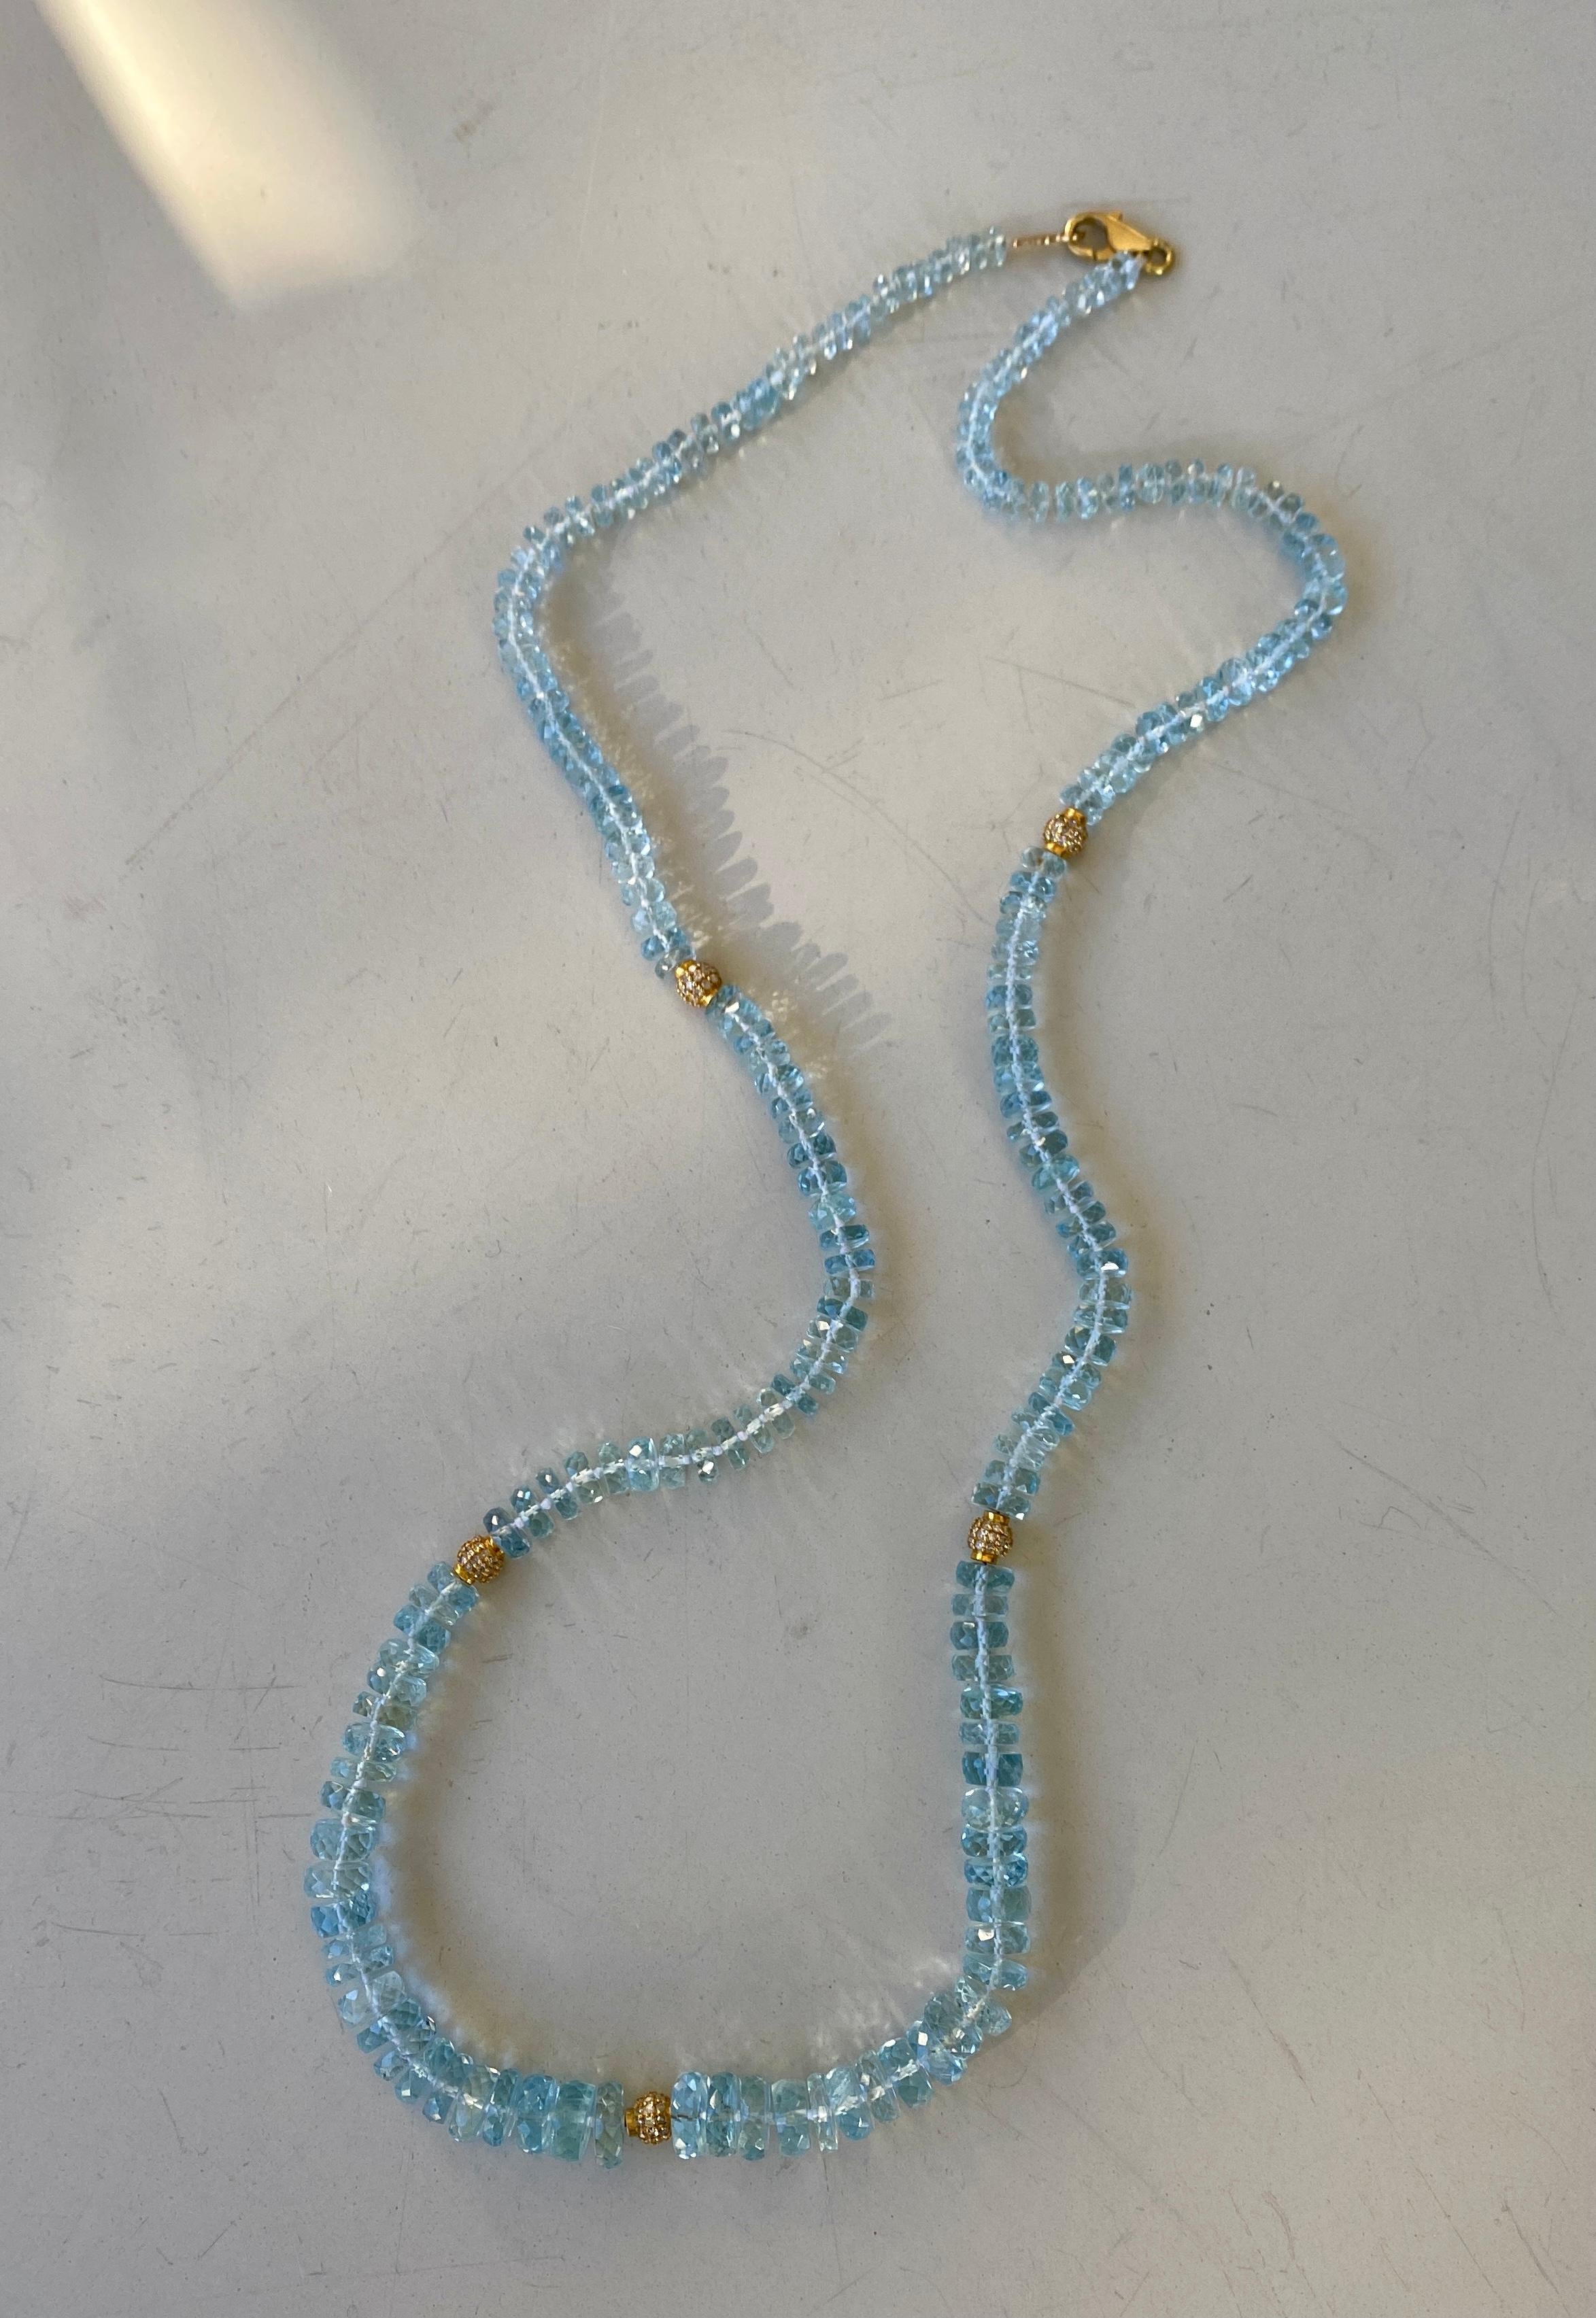 Faceted aquamarine bead necklace with five diamond spacers in 14 karat yellow gold and a clasp in 18 karat yellow gold, length of 24.5 inches.

This beautifully brilliant necklace of fine faceted aquamarine beads, accented by five diamond spacers,